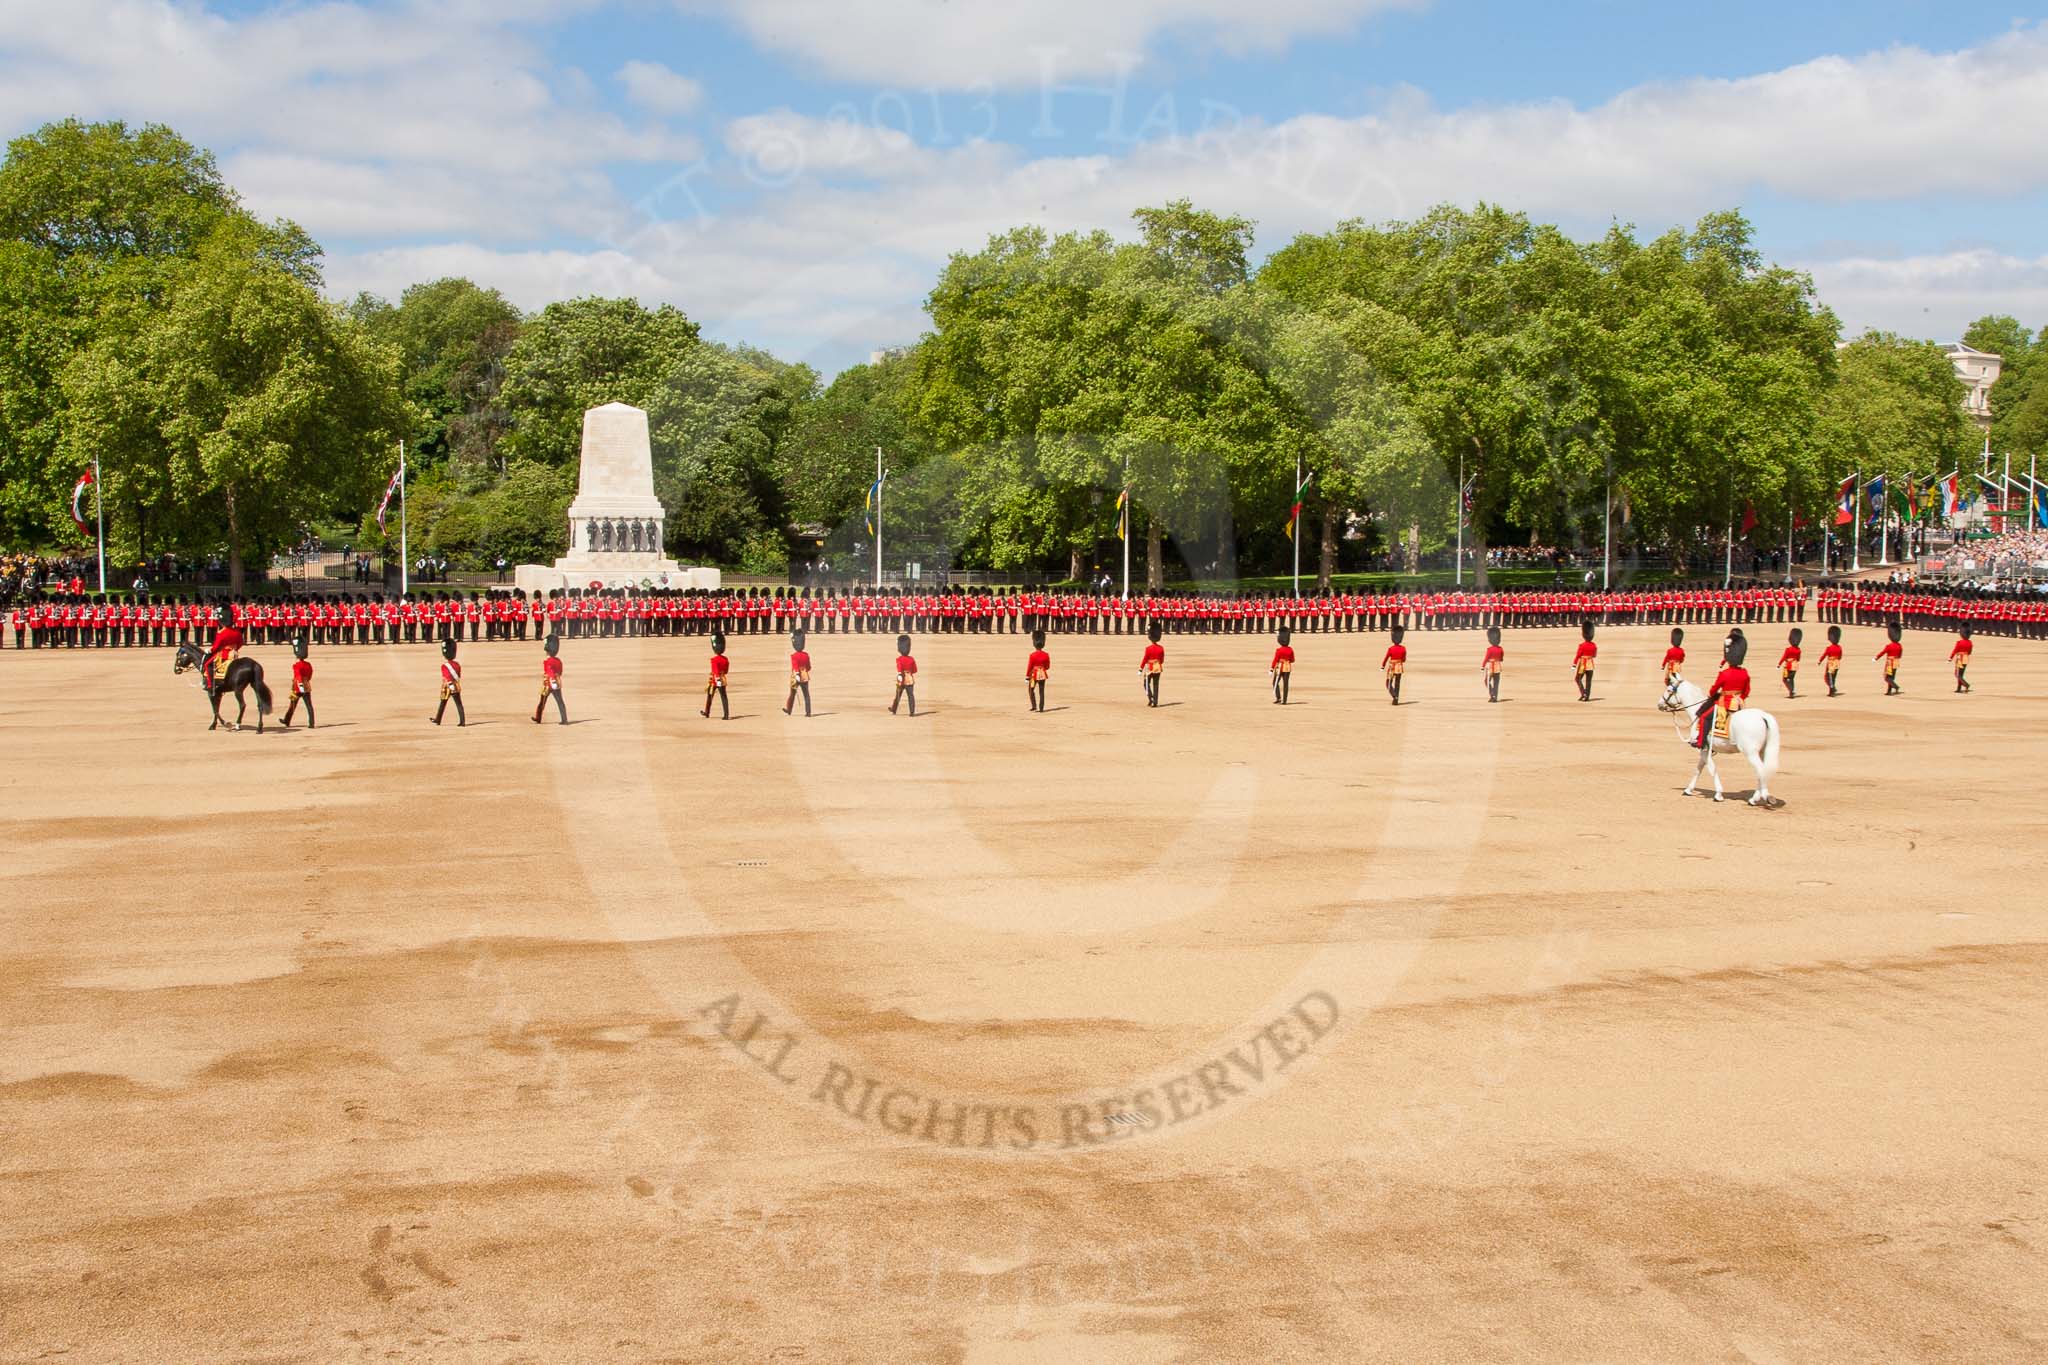 The Colonel's Review 2013: The eighteen officers are marching back towards their Guards, with the Major of the Parade on their left and the Adjutant of the Parade behind..
Horse Guards Parade, Westminster,
London SW1,

United Kingdom,
on 08 June 2013 at 10:41, image #195